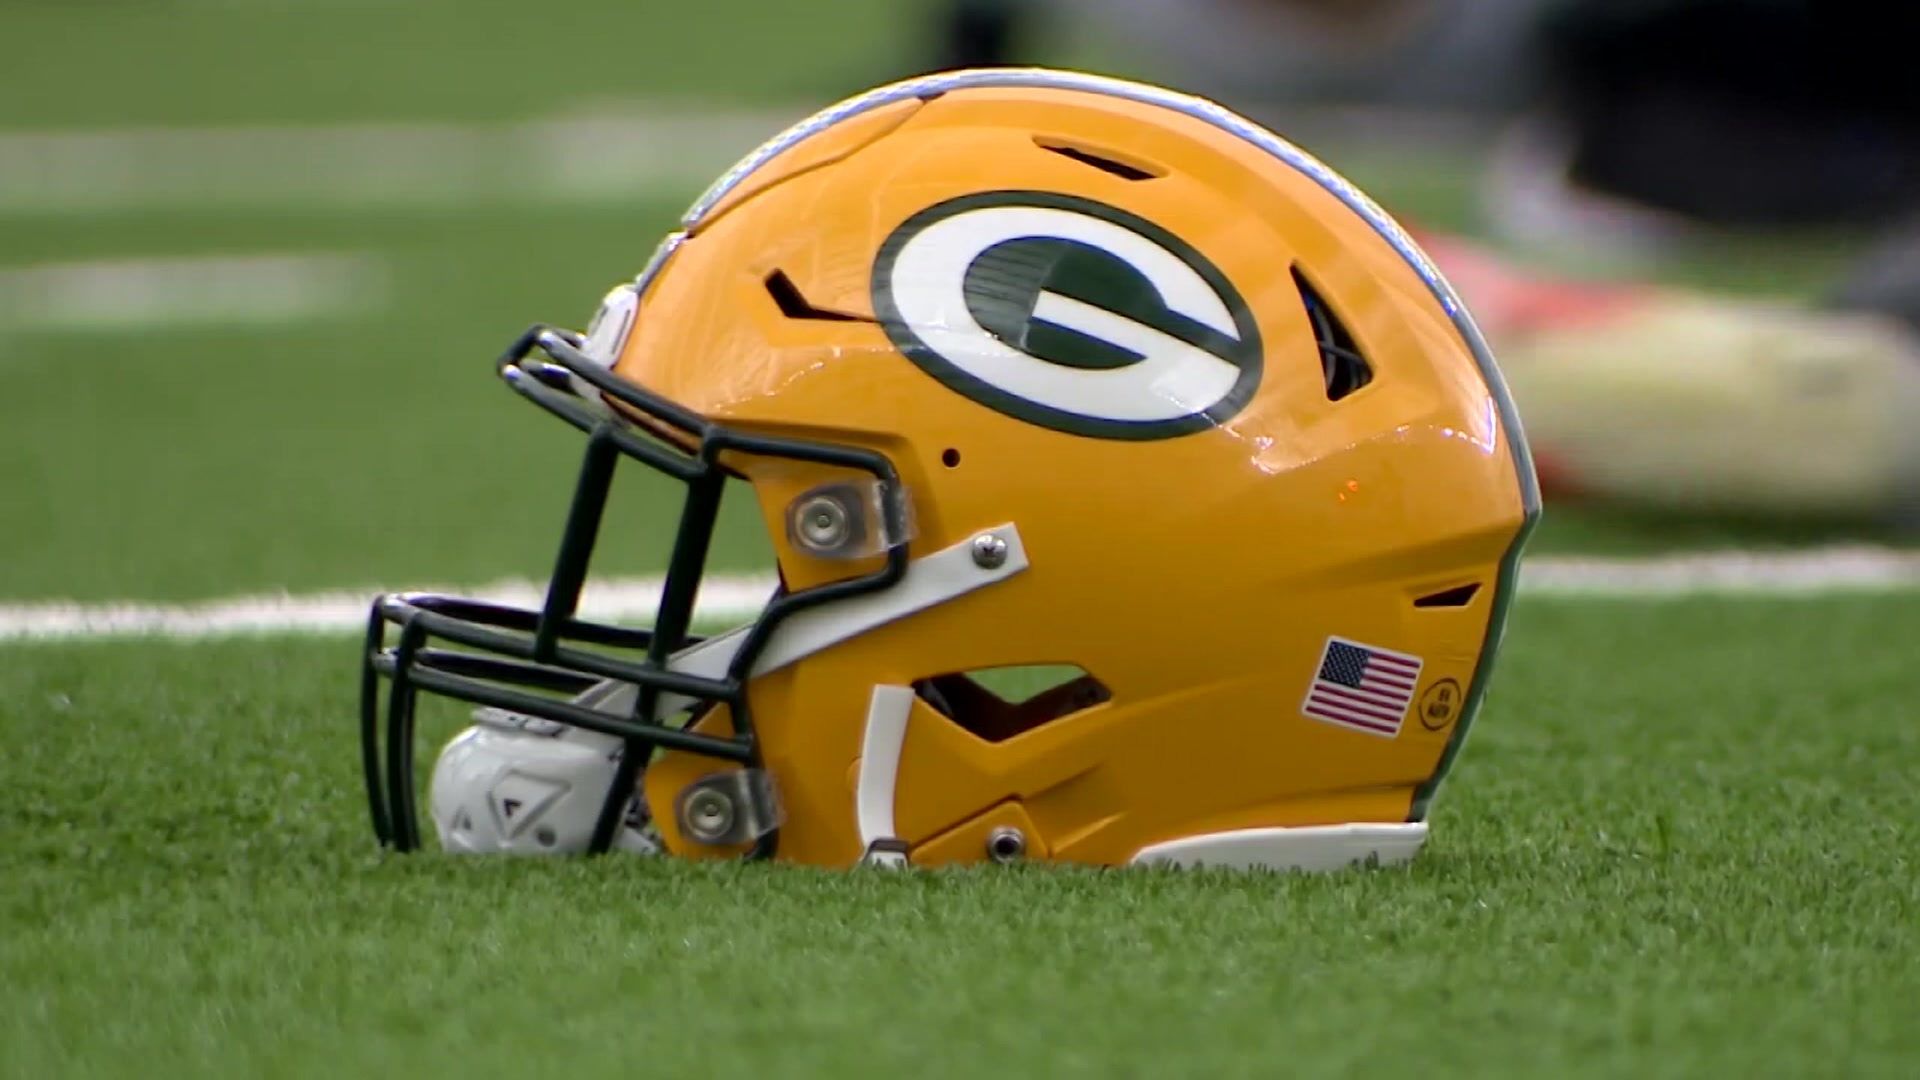 Game time set: Packers to host Lions at Lambeau Field at 7:20 p.m. Sunday